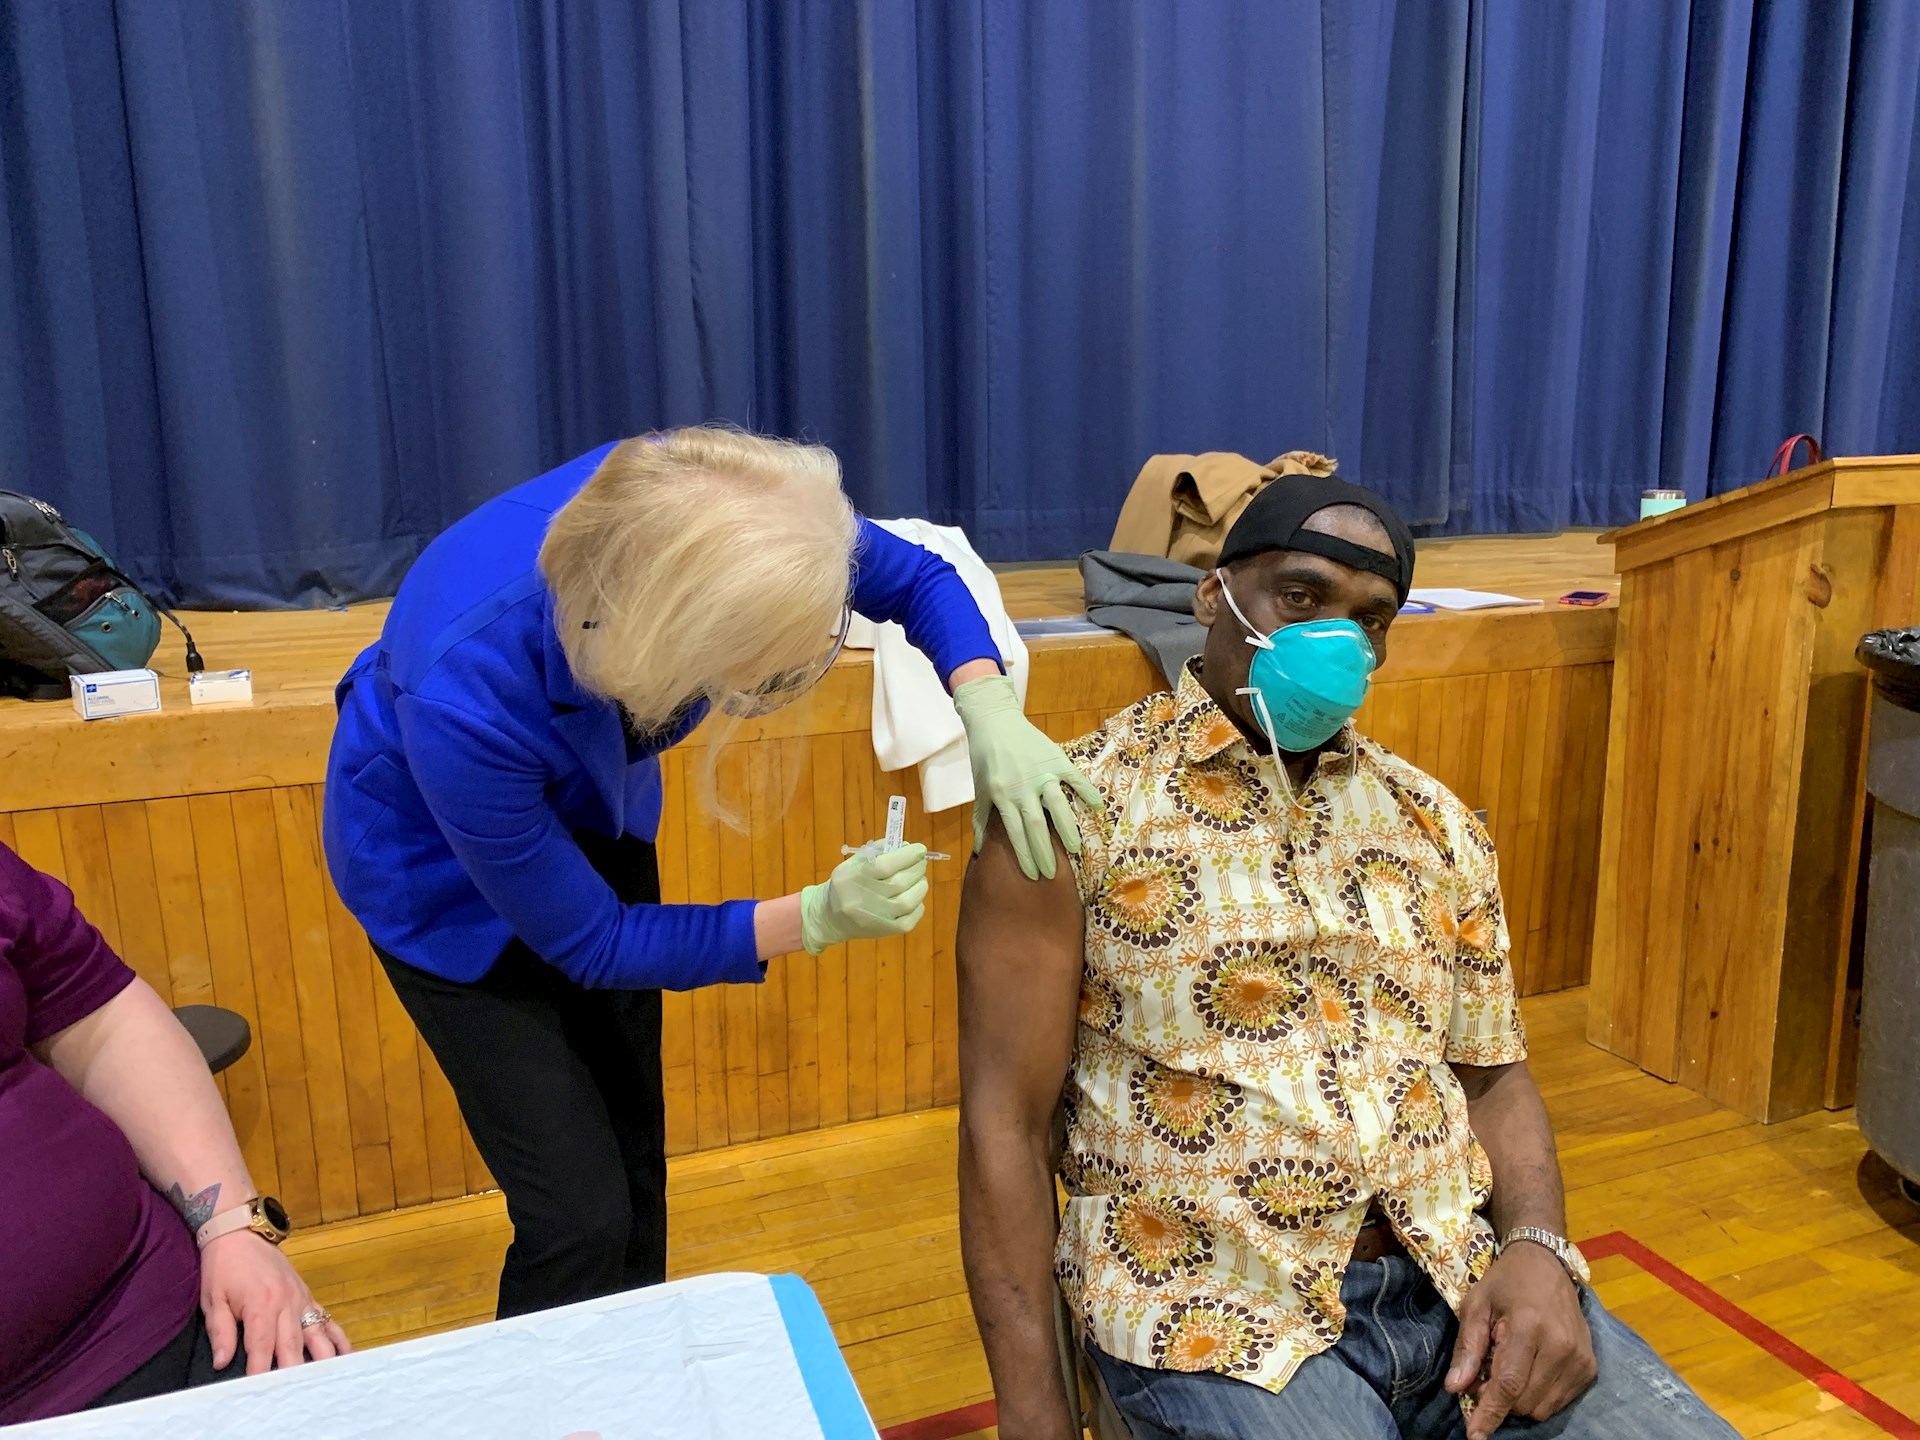 Roxanna Gapstur, PhD, RN, President and CEO, administers COVID-19 vaccines as part of the mobile vaccination effort. Robert Simpson, CEO, Crispus Attucks Crispus Attucks receives his vaccine along with other qualified community members in phase 1a.